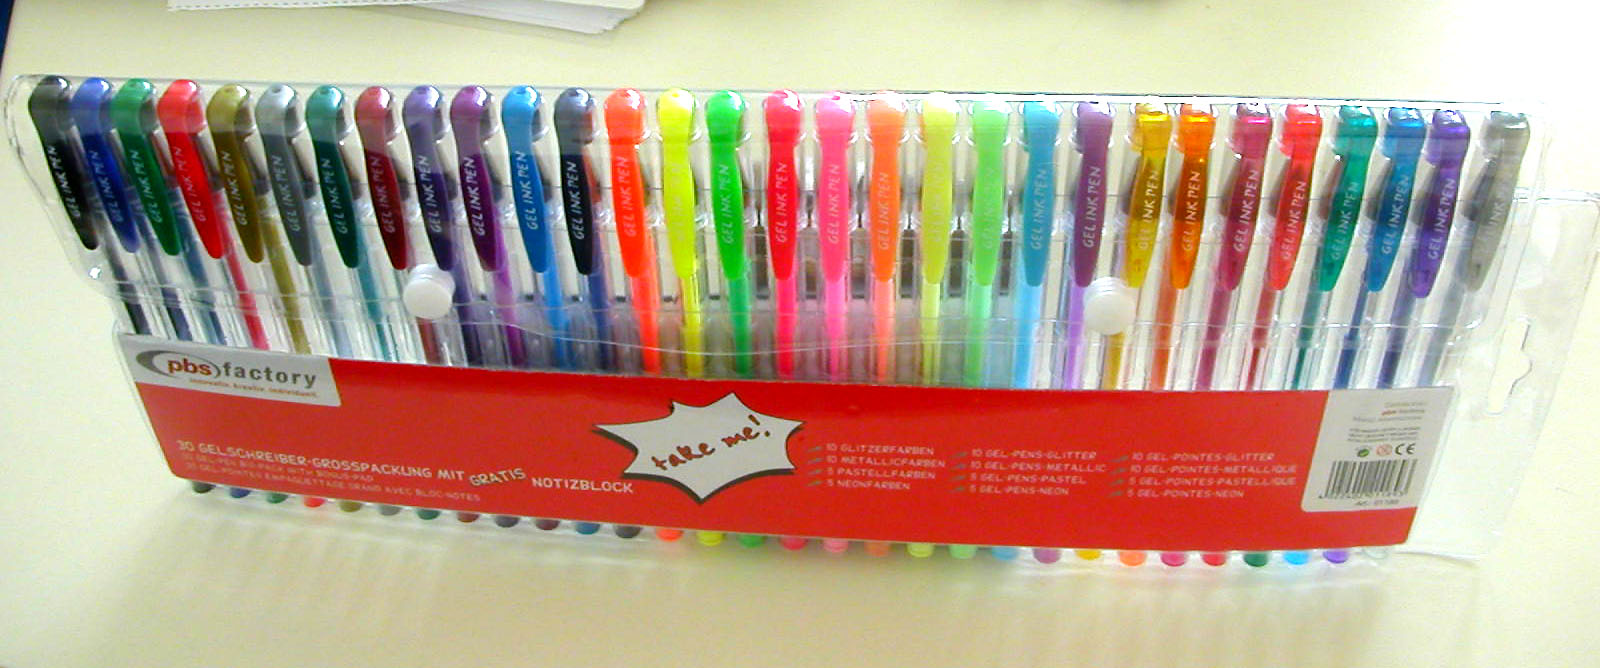 Online stationary gifts supply assorted project sparkle fine color pen